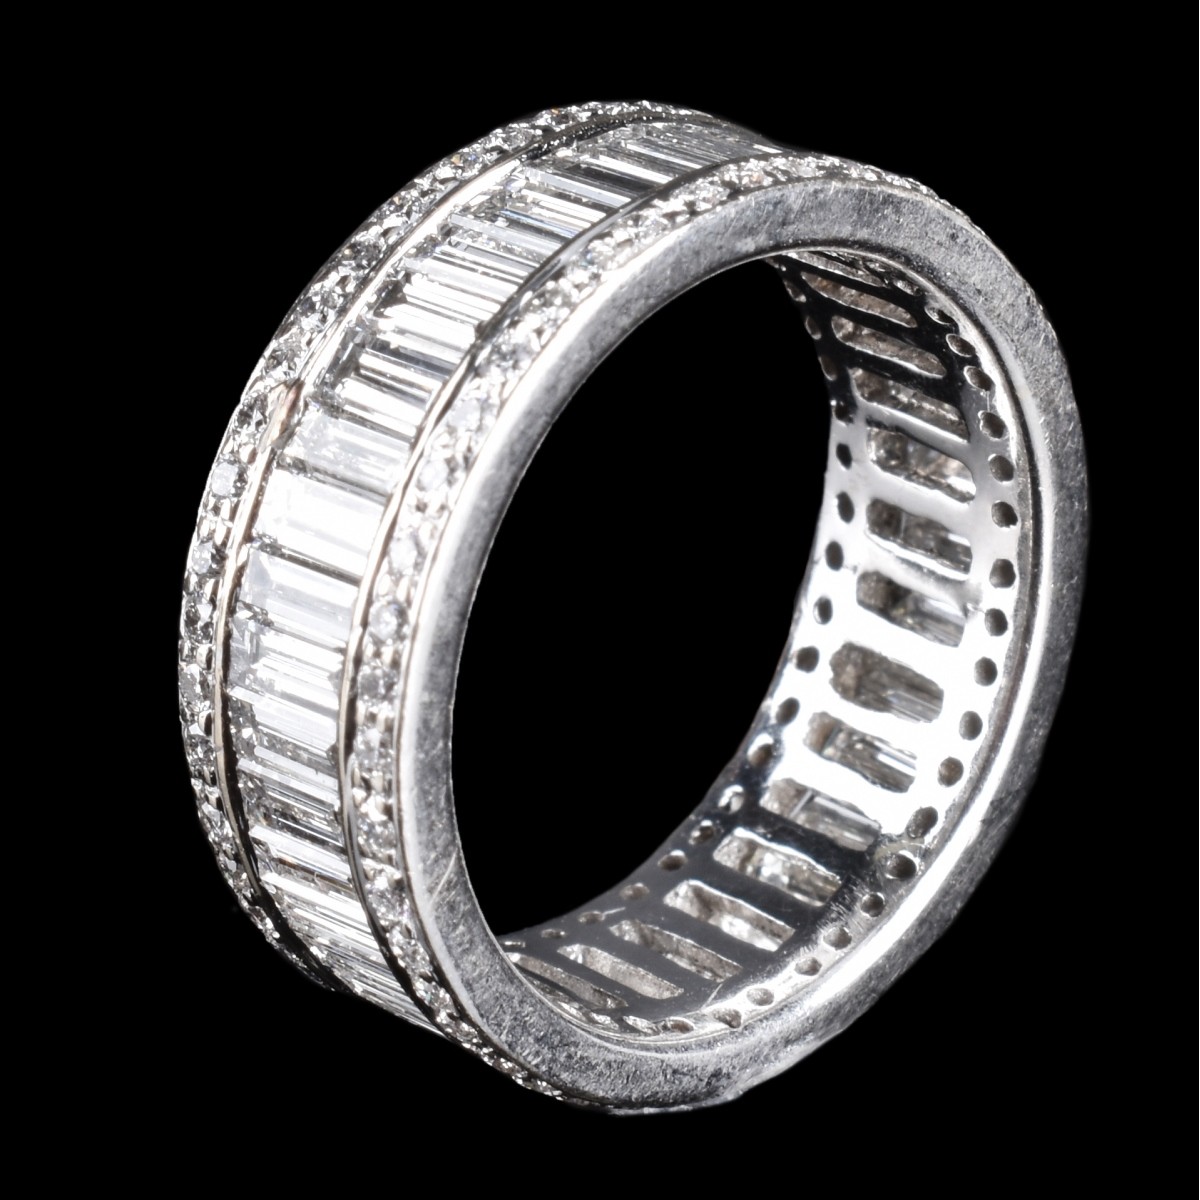 Diamond and White Gold Eternity Band - Image 2 of 3